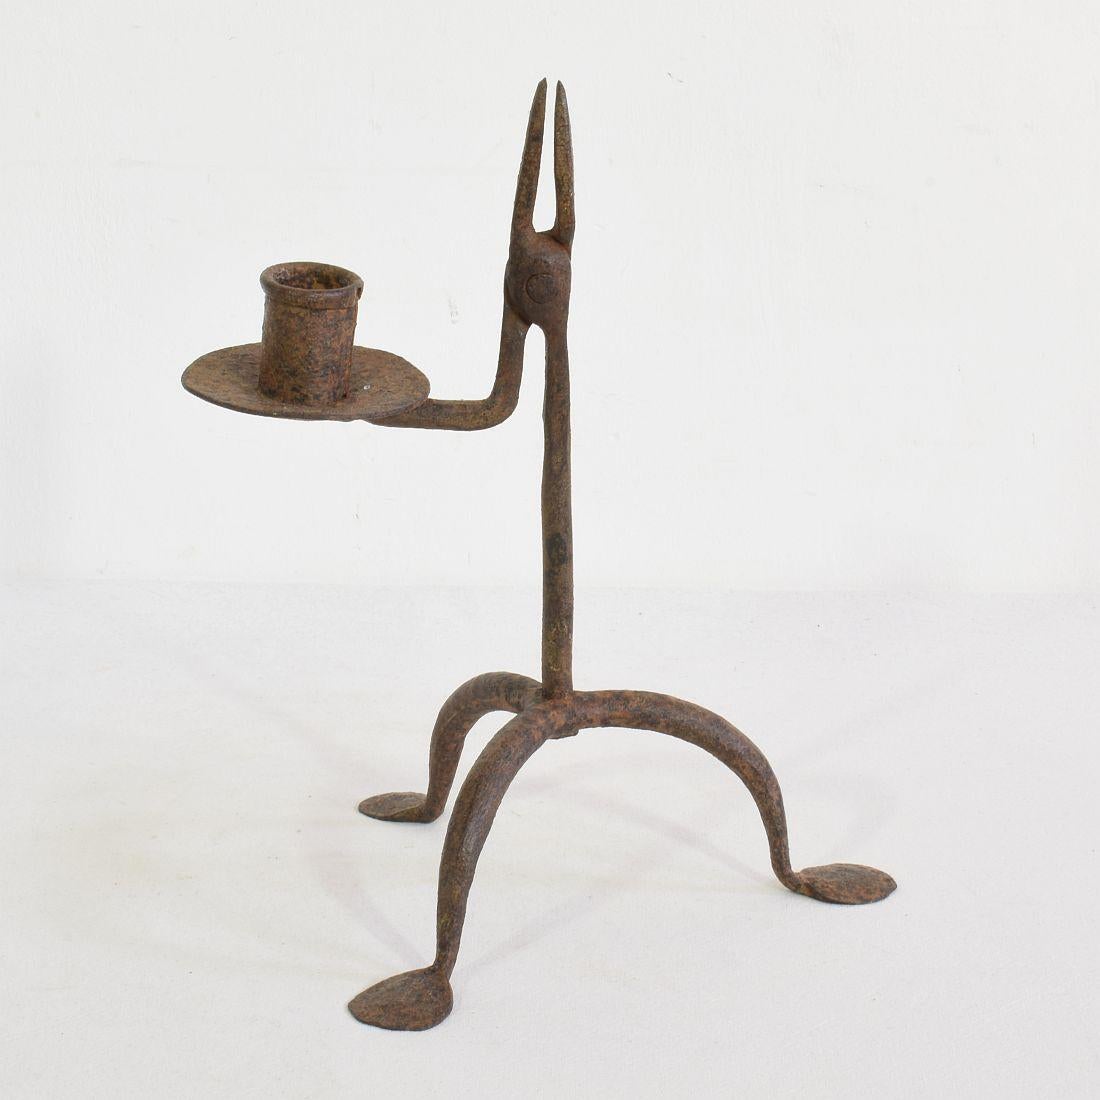 Beautiful hand forged iron candleholder, Southern France, Spain, 18th-19th century. Weathered.